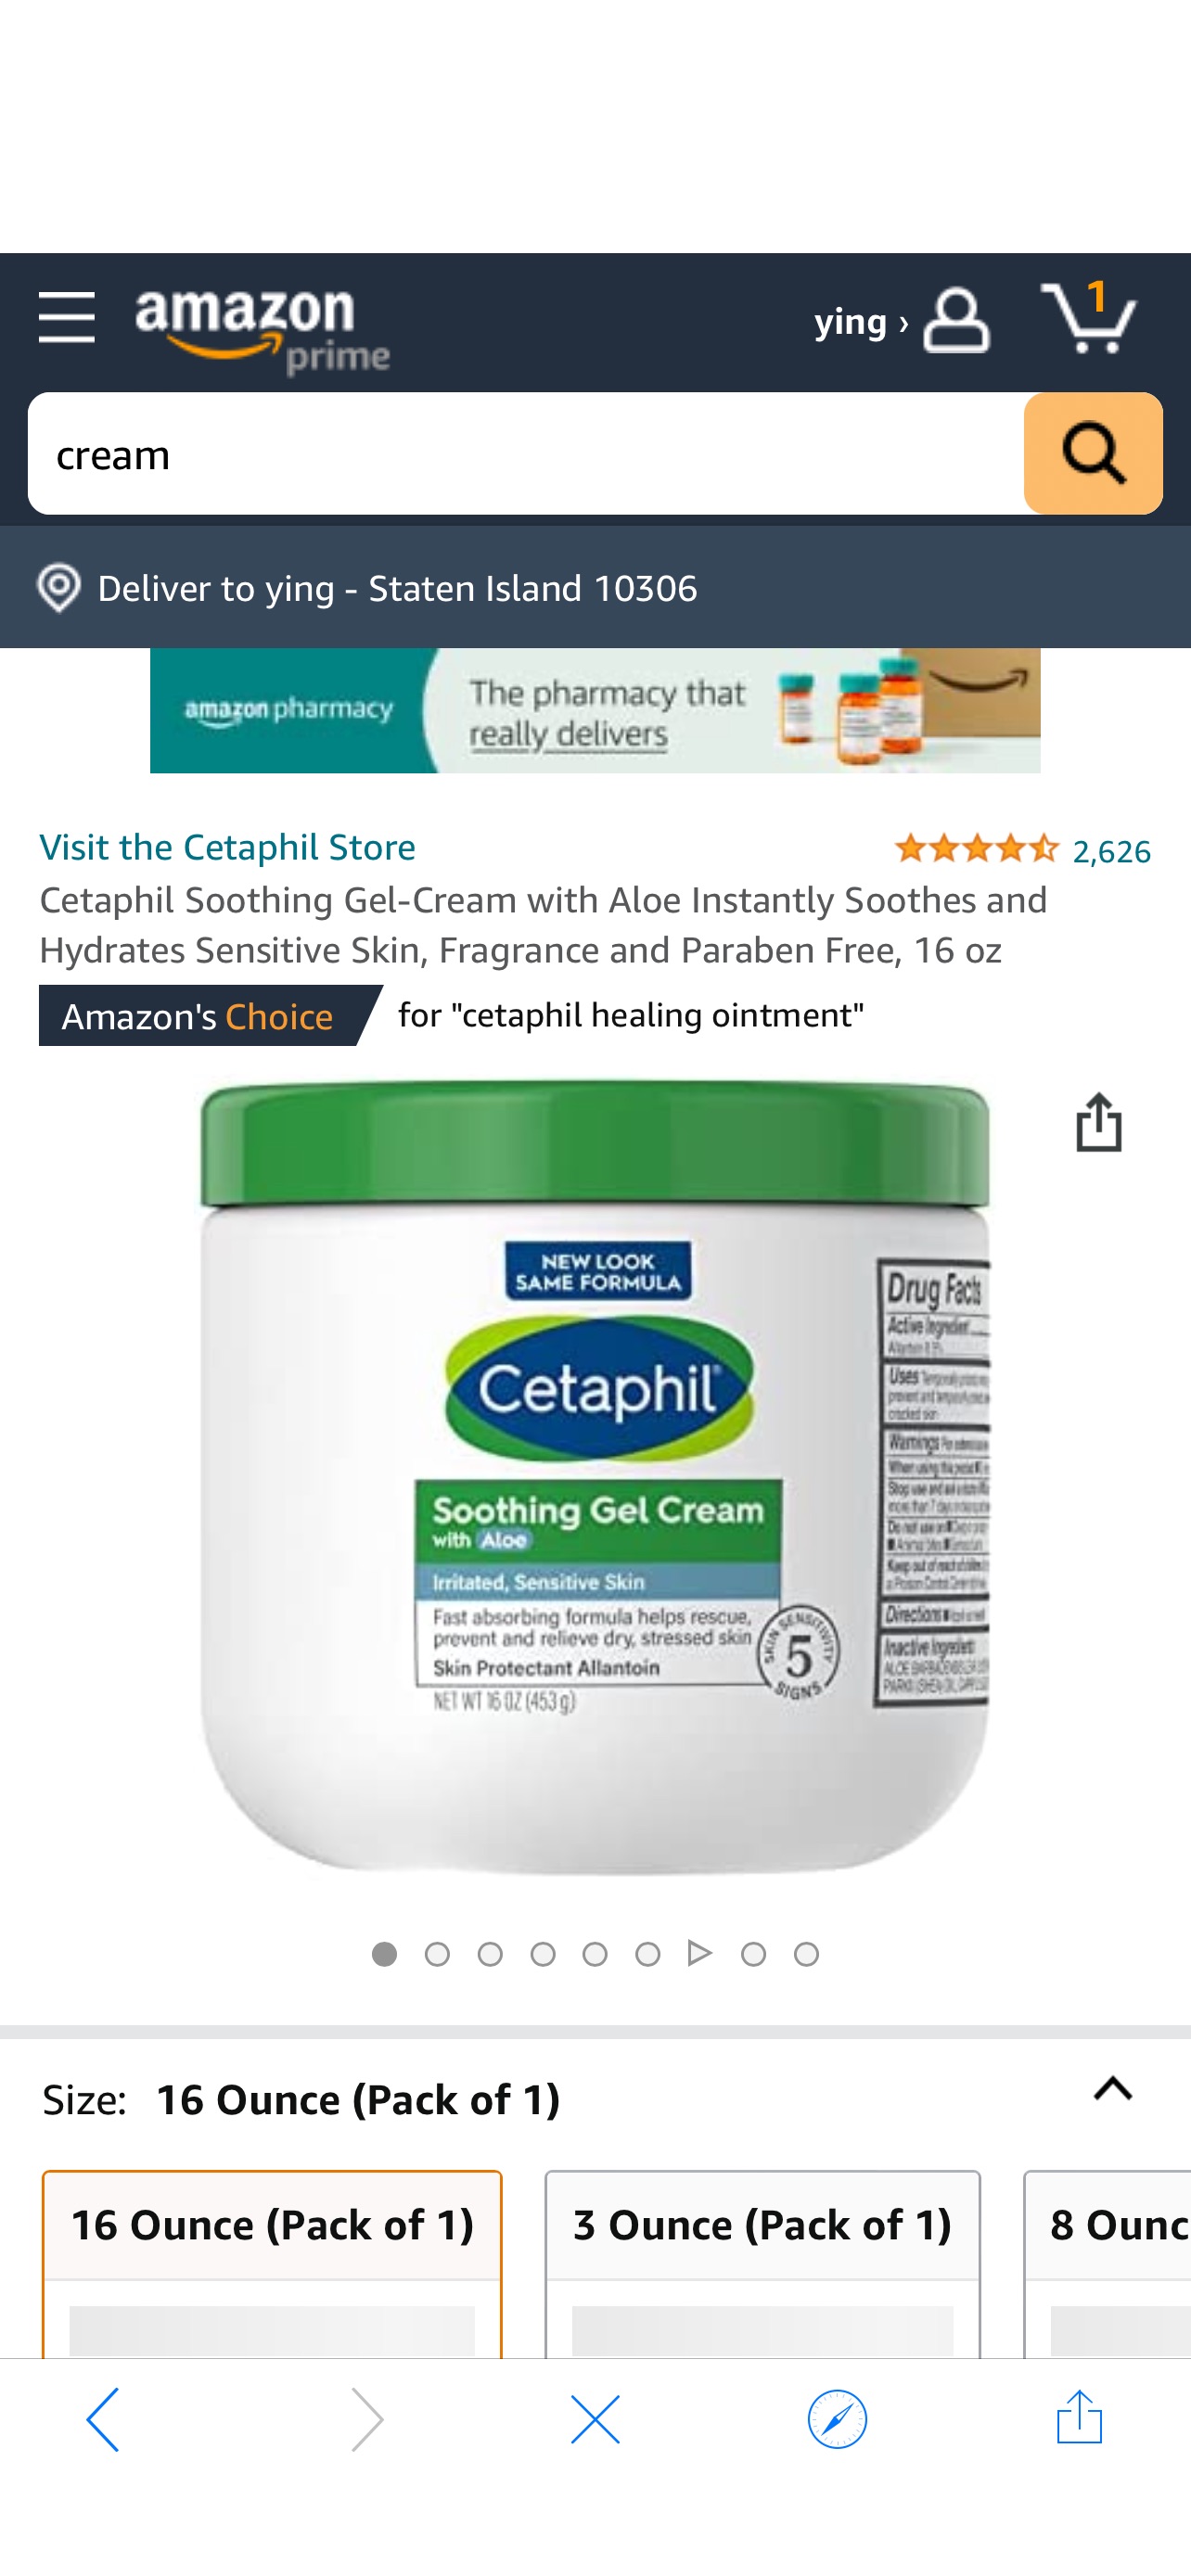 Amazon.com : Cetaphil Soothing Gel-Cream with Aloe Instantly Soothes and Hydrates Sensitive Skin, Fragrance and Paraben Free, 16 oz : Beauty & Personal Care